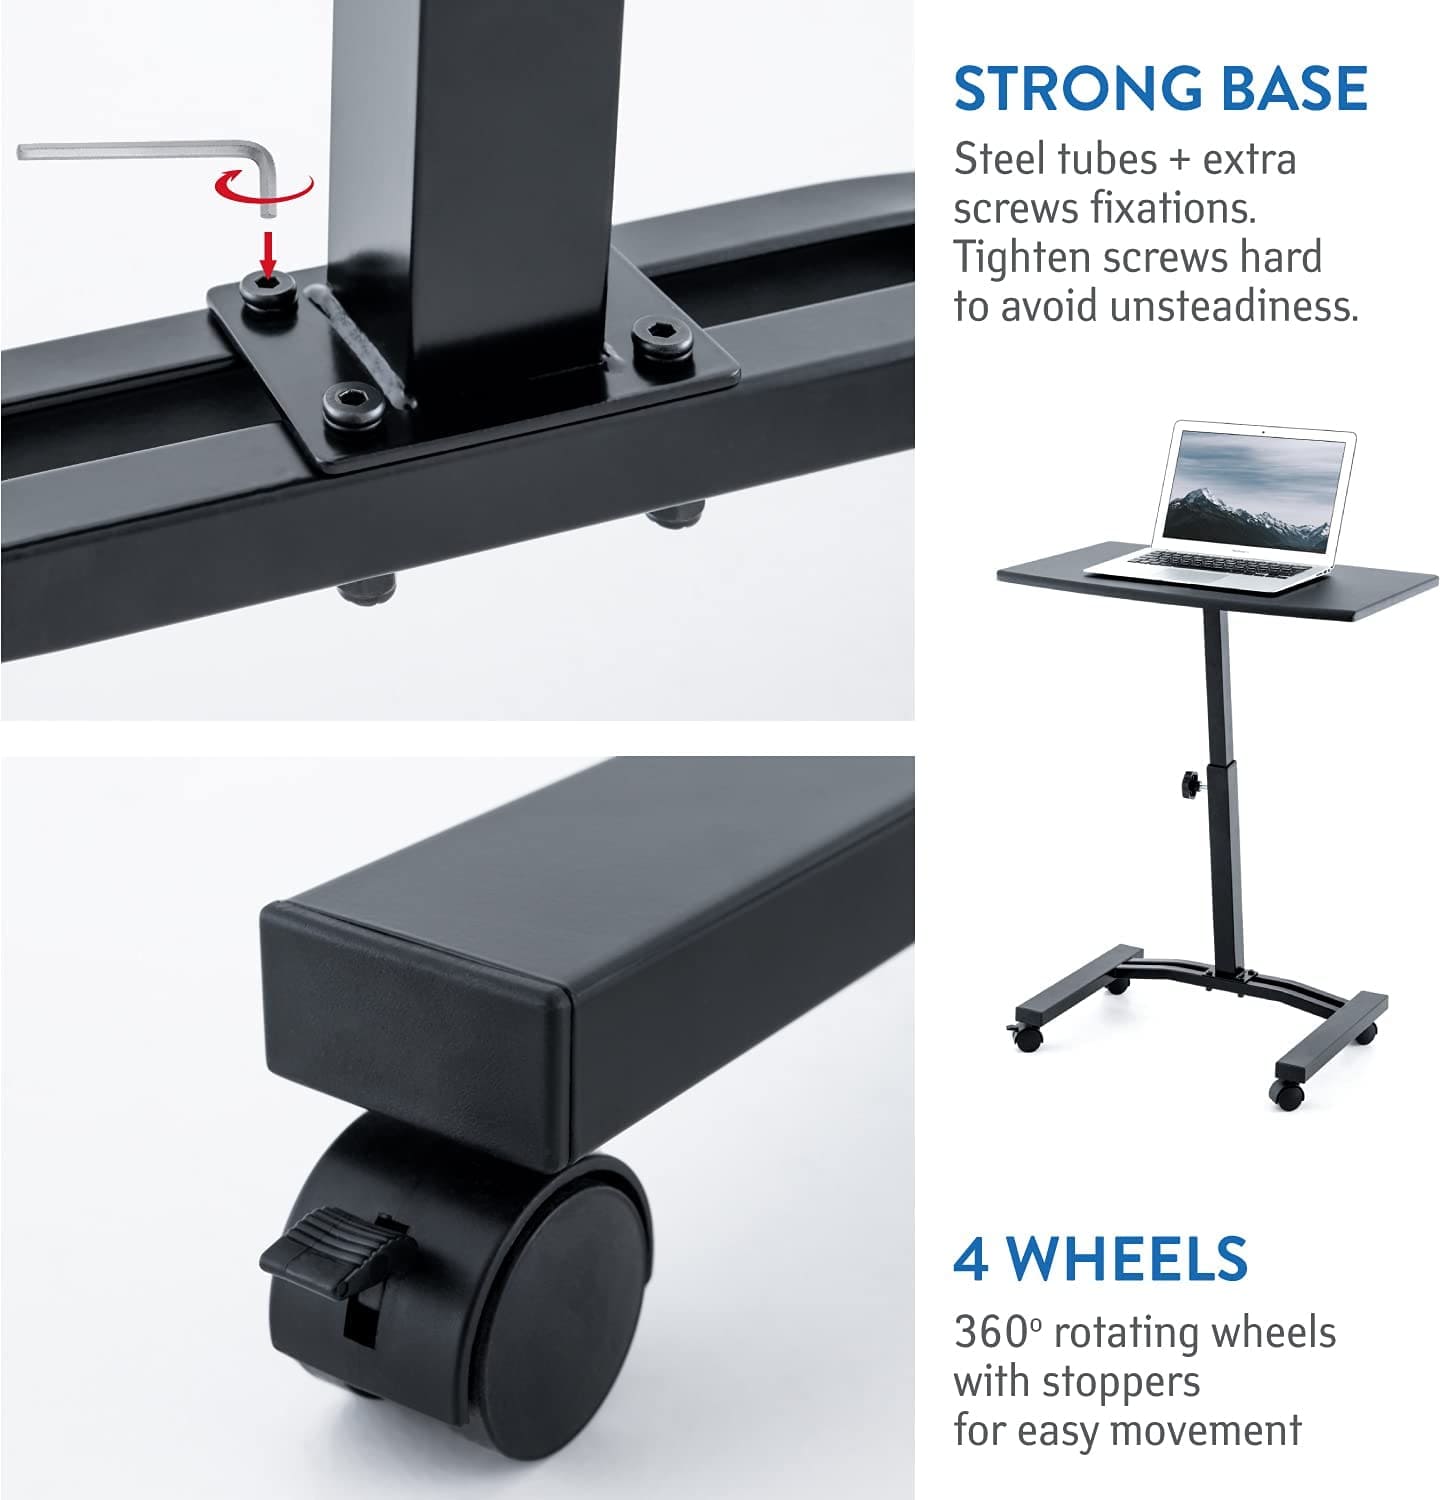 Laptop Stand Desk, Strong base, 4 wheels